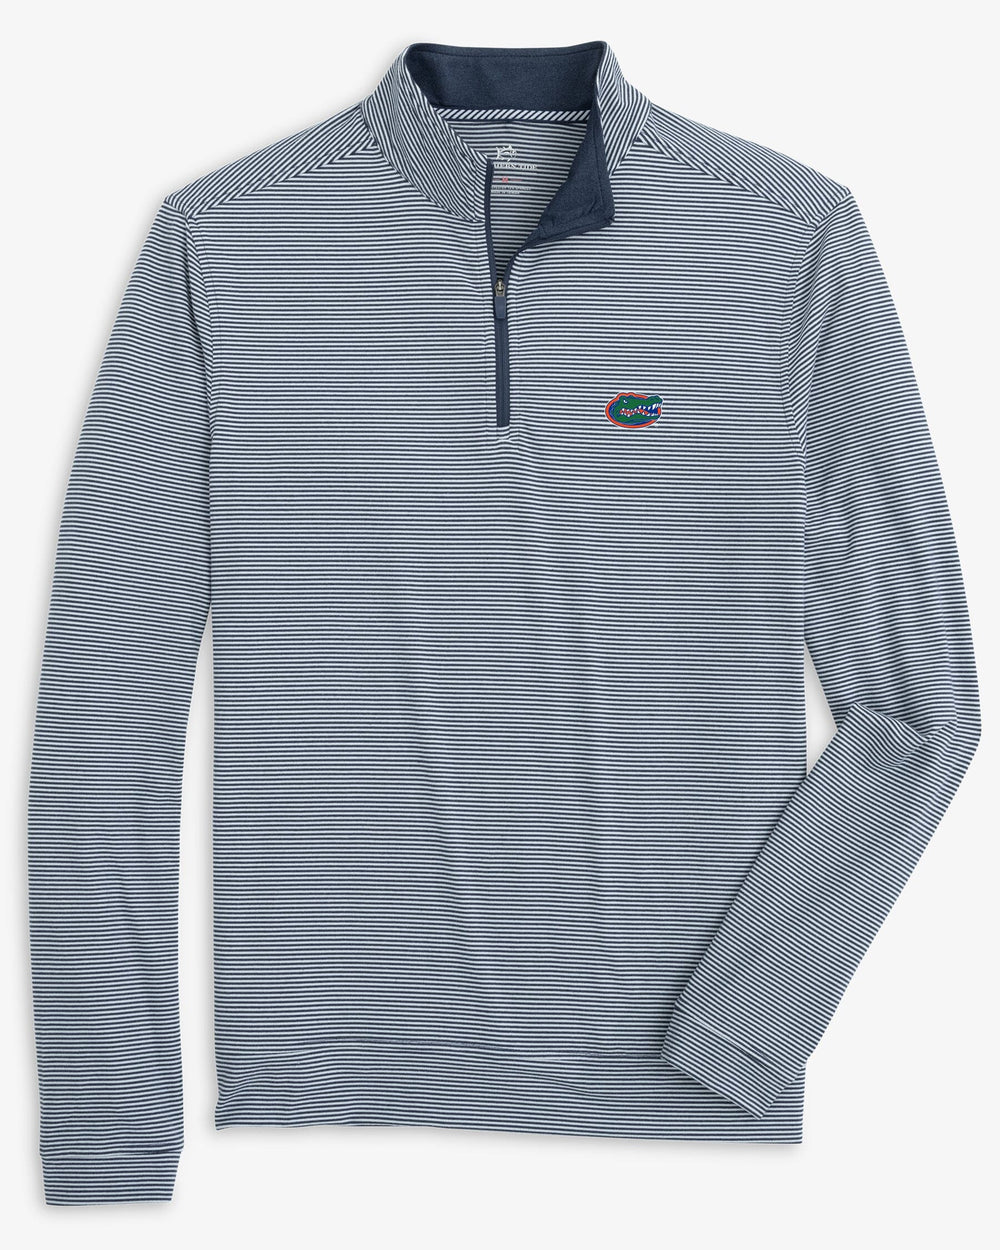 The front view of the Florida Gators Cruiser Micro-Stripe Heather Quarter Zip by Southern Tide - Heather Navy